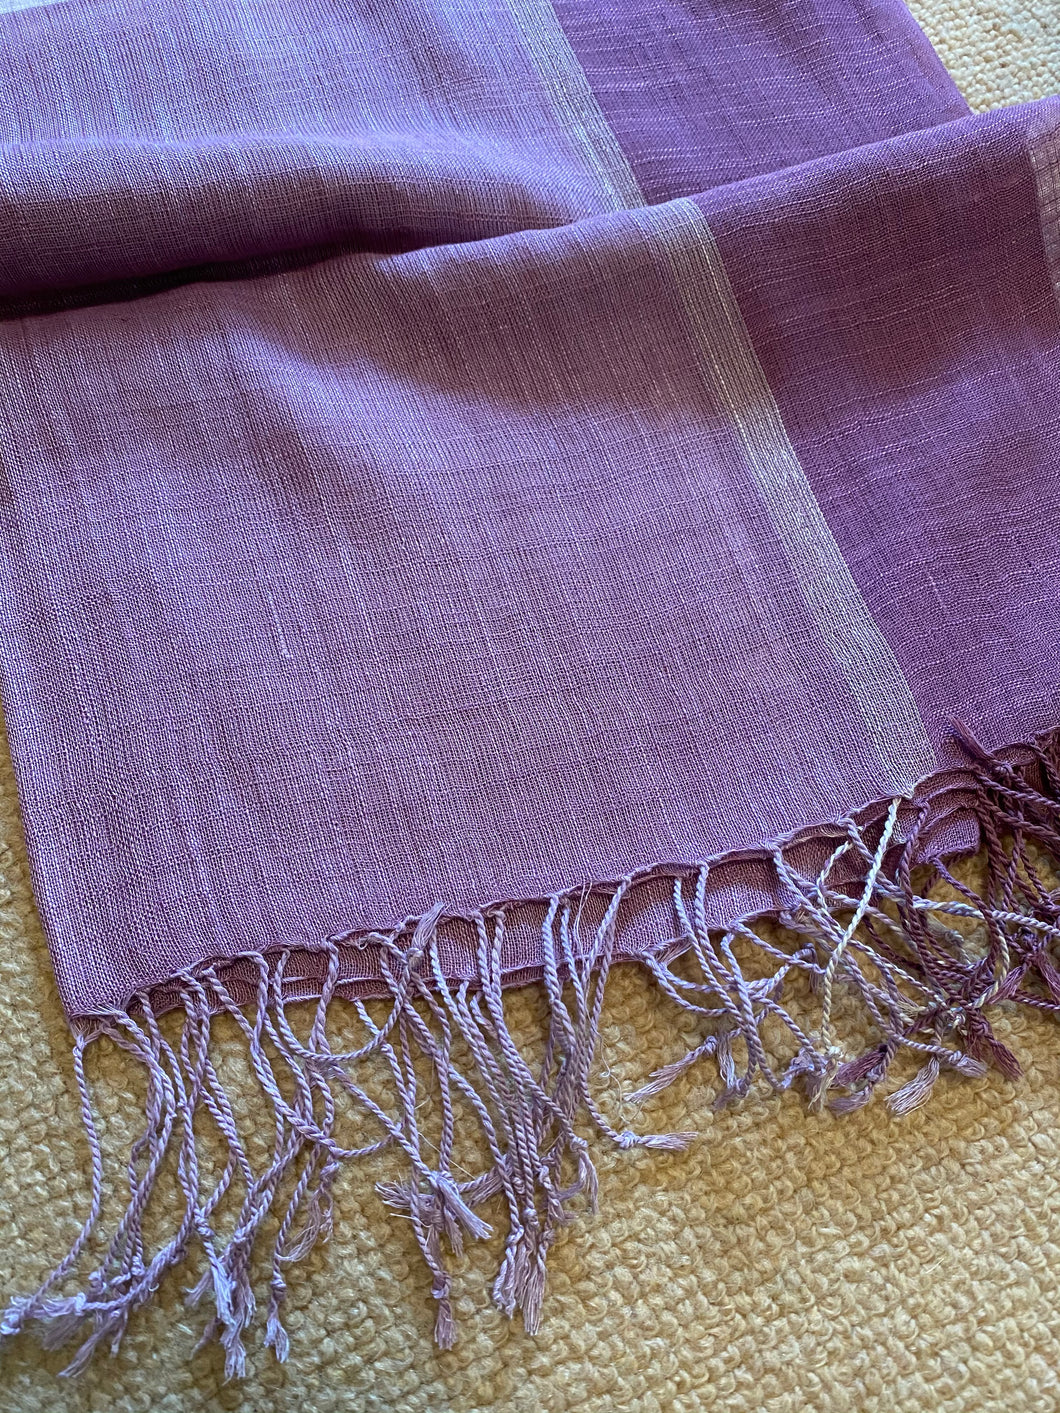 SU129 Lavender, large check, light textured, long scarf